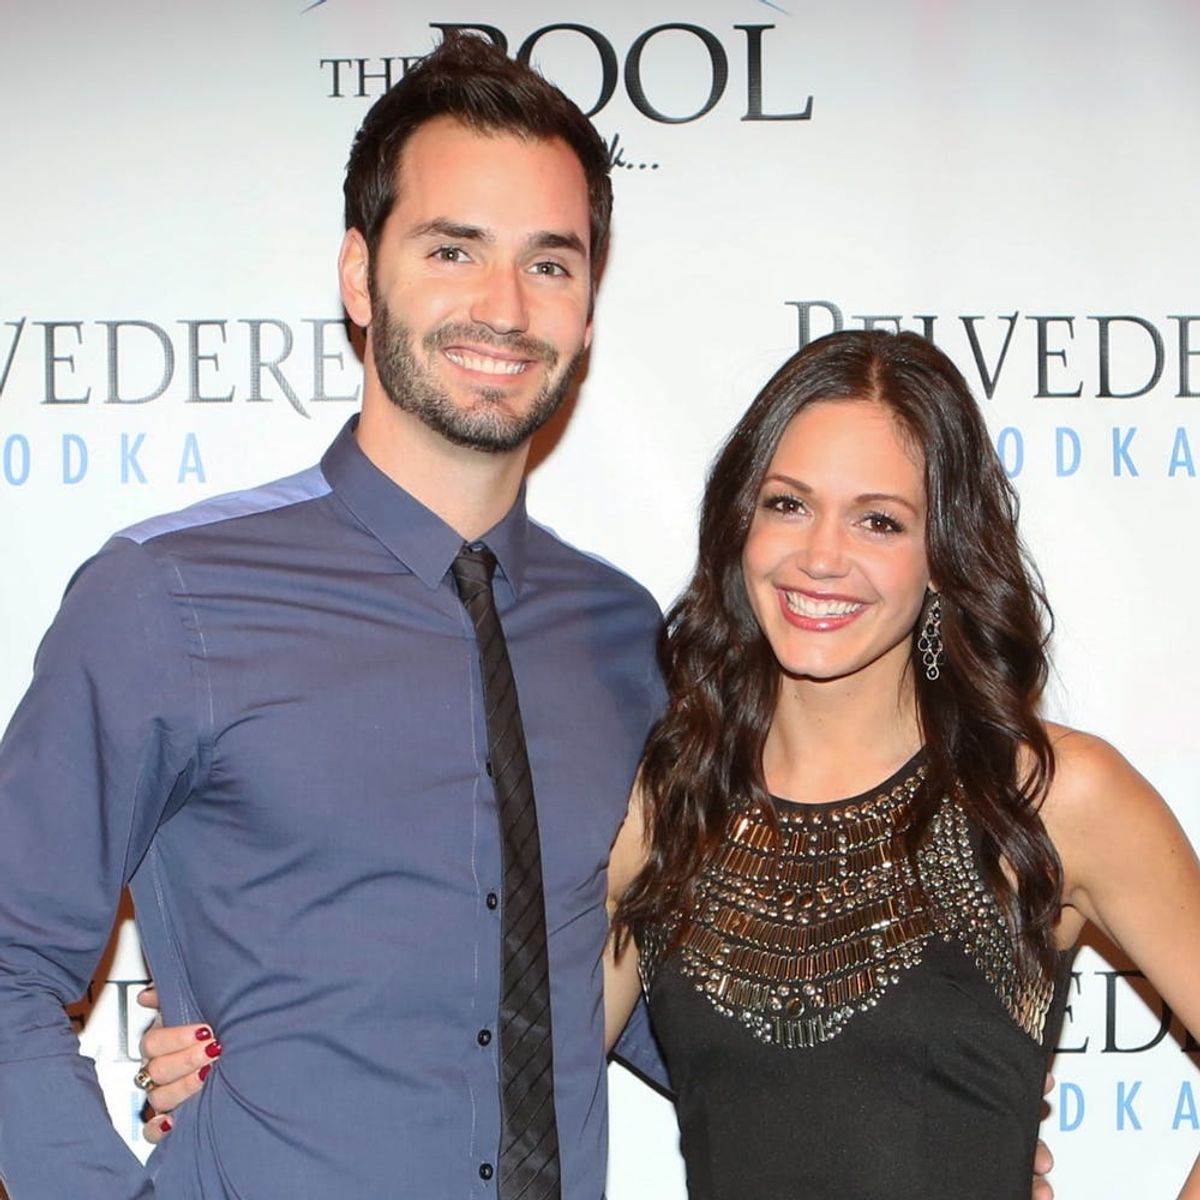 ‘Bachelorette’ Star Desiree Hartsock Is Pregnant With Baby #2!